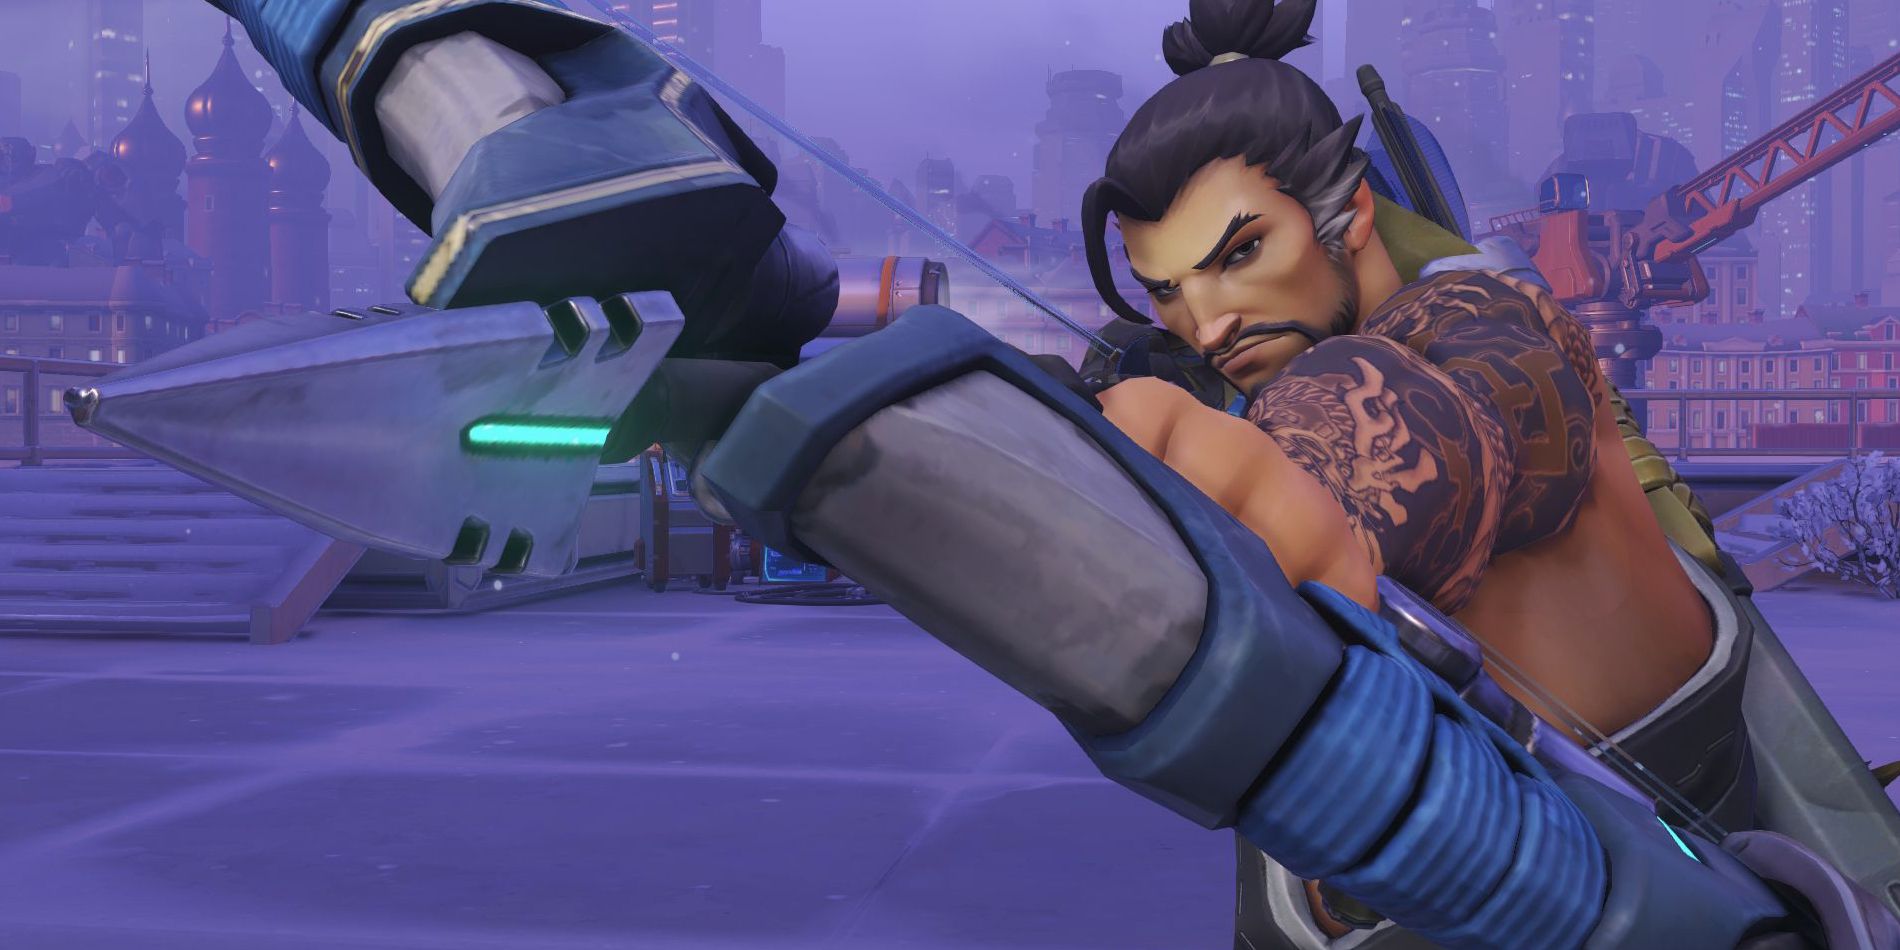 Hanzo from Blizzard's Overwatch.